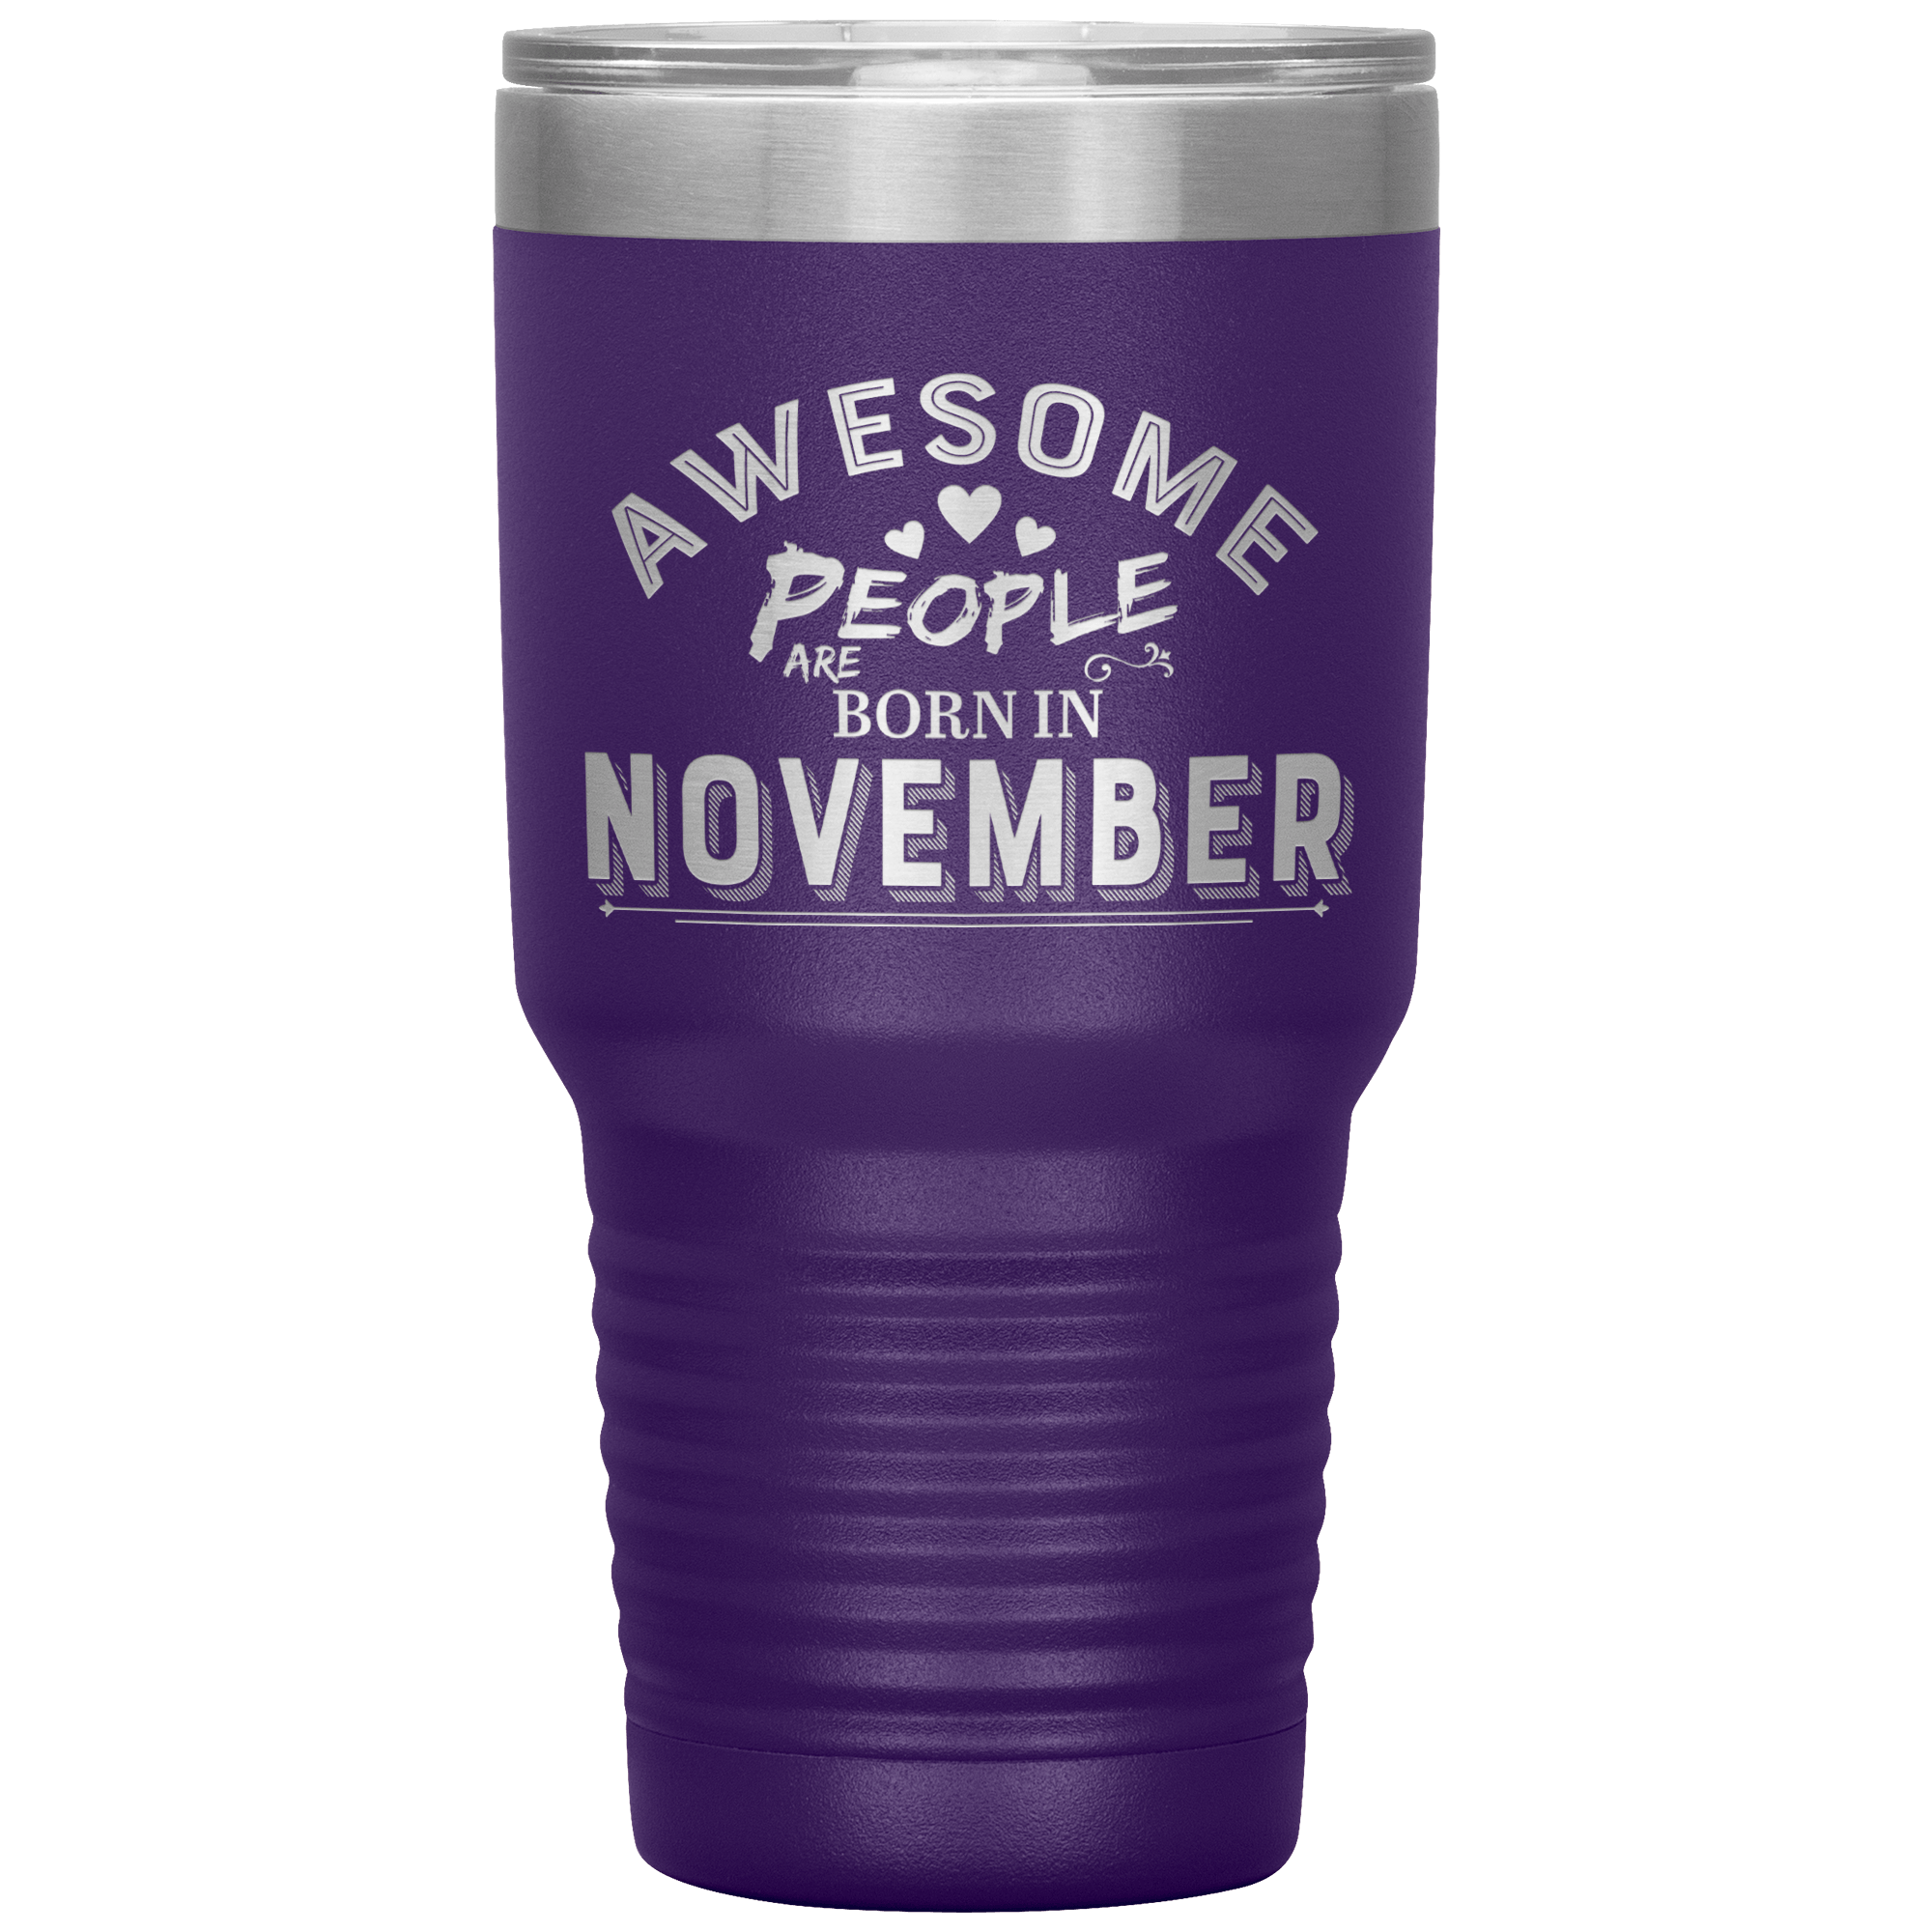 "AWESOME PEOPLE ARE BORN IN NOVEMBER" Tumbler